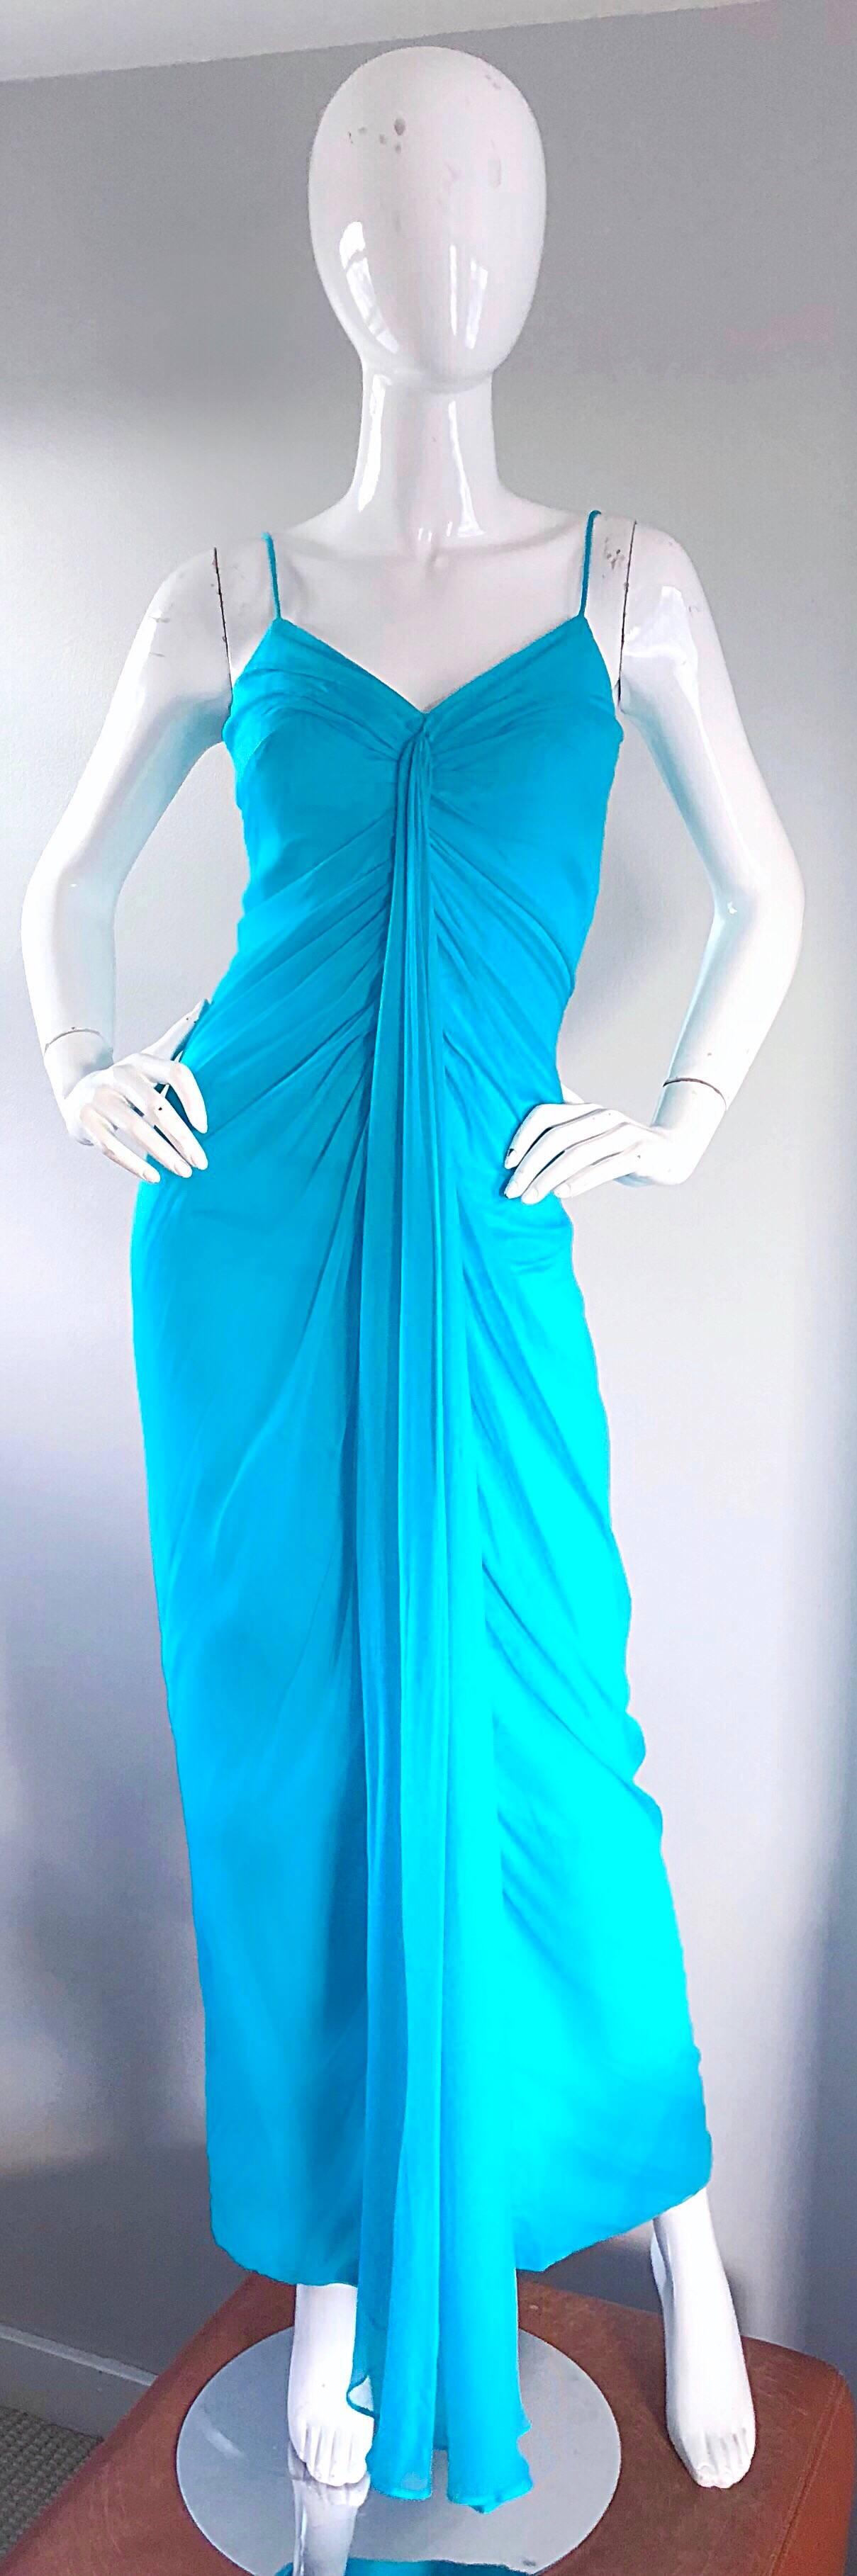 Stunning vintage 1970s LILLI DIAMOND vibrant turquoise blue full length Grecian style disco evening dress! With the unfortunate recent passing of the 99 year old designer, her pieces are only going to increase in value.
 Features a gorgeous blue